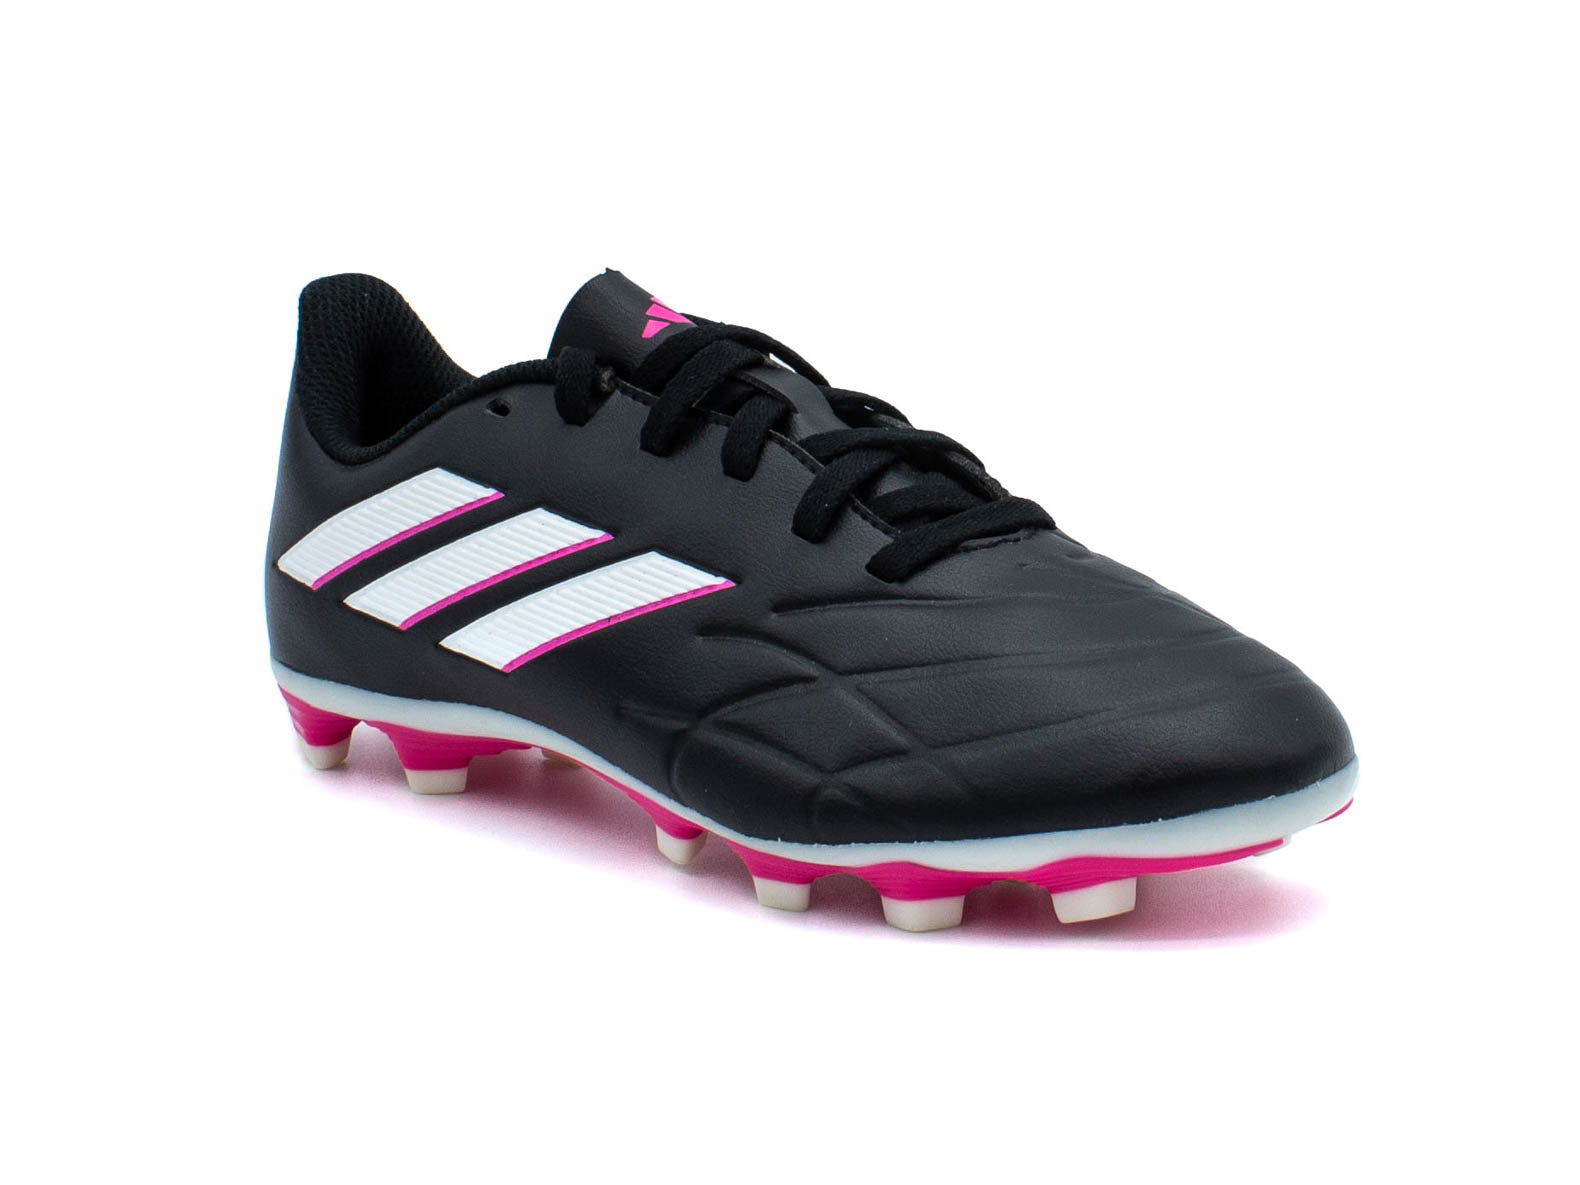 ADIDAS COPA PURE.4 FLEXIBLE GROUND CLEATS